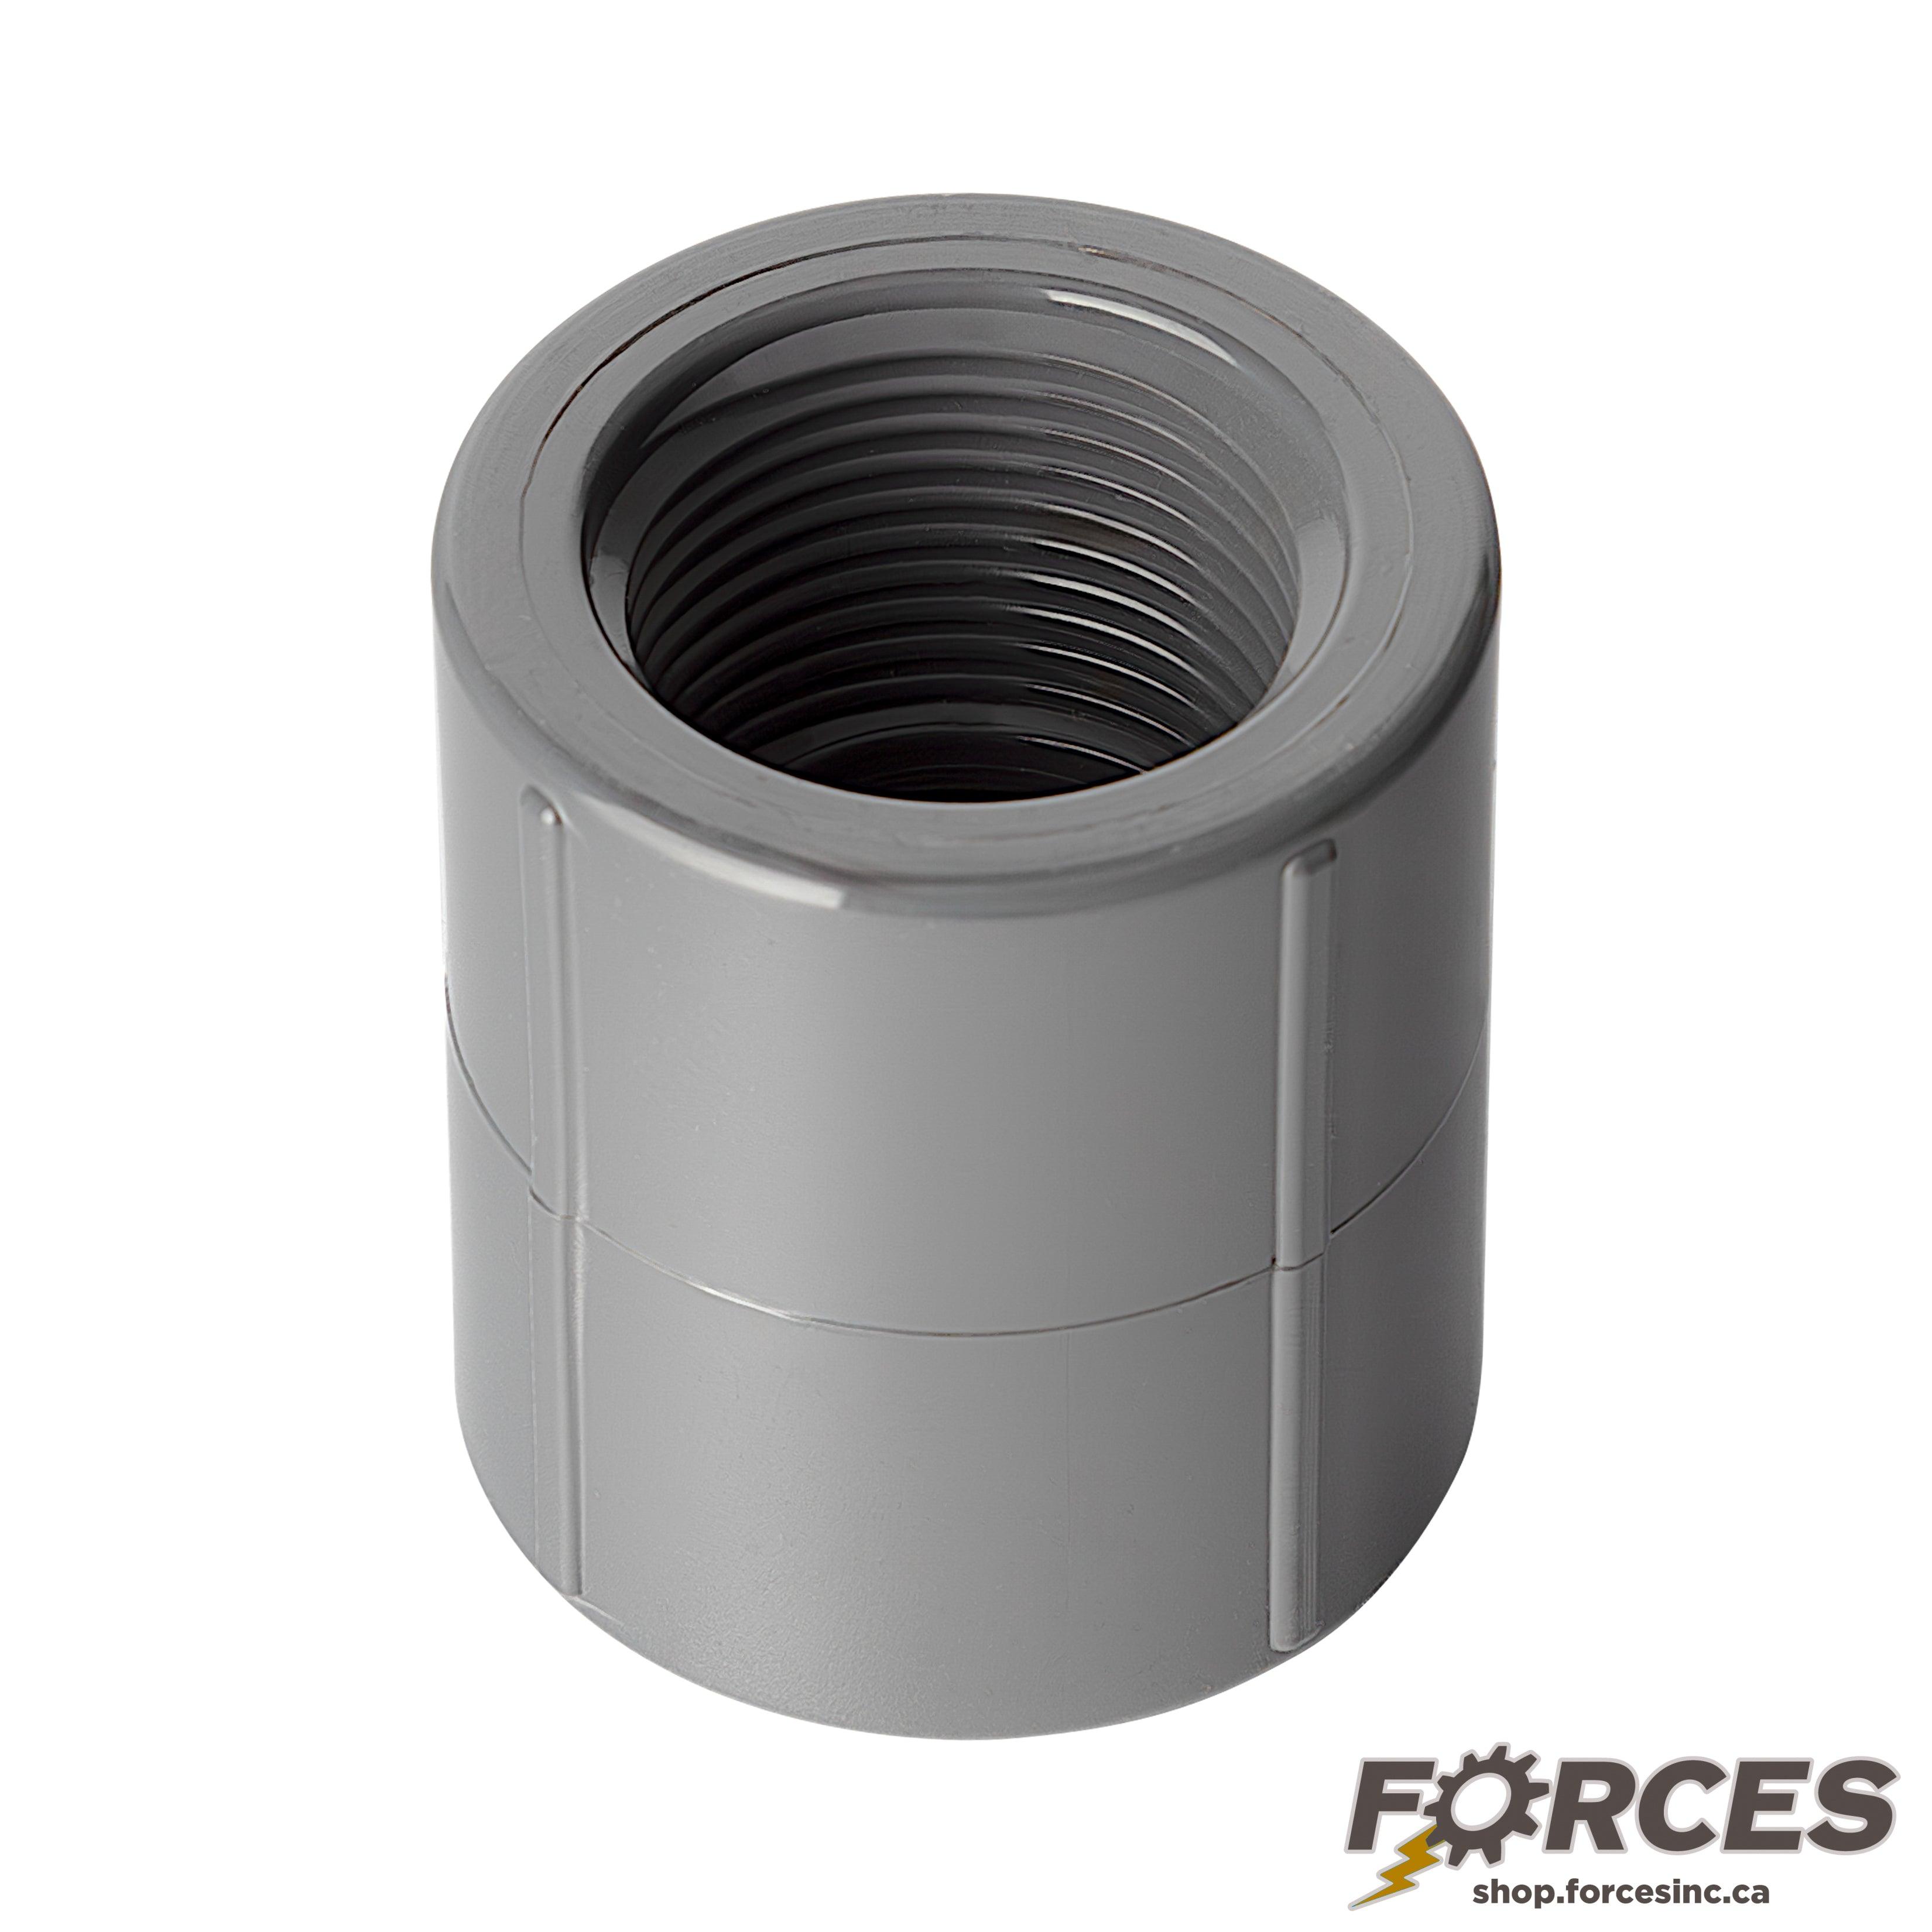 2" Coupling (Threaded) Sch 80 - PVC Grey | 830020 - Forces Inc